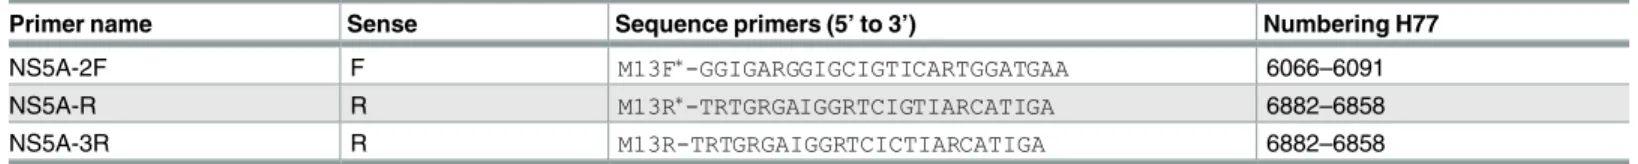 Table 2. Primers used for PCR reactions (genotypes 1 to 5).